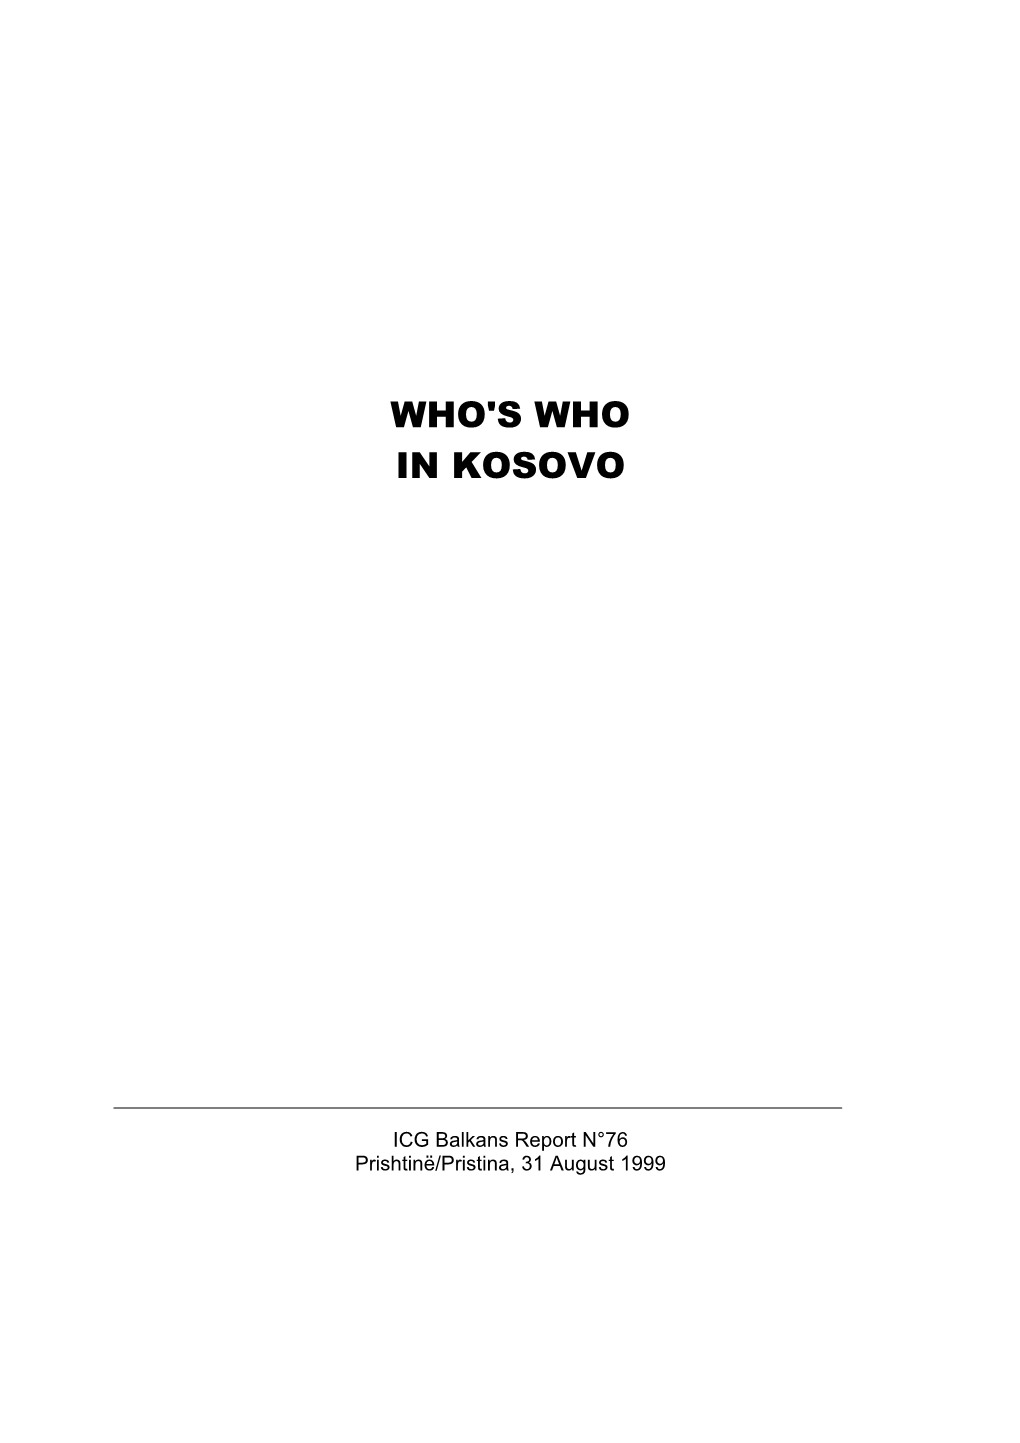 Who's Who in Kosovo